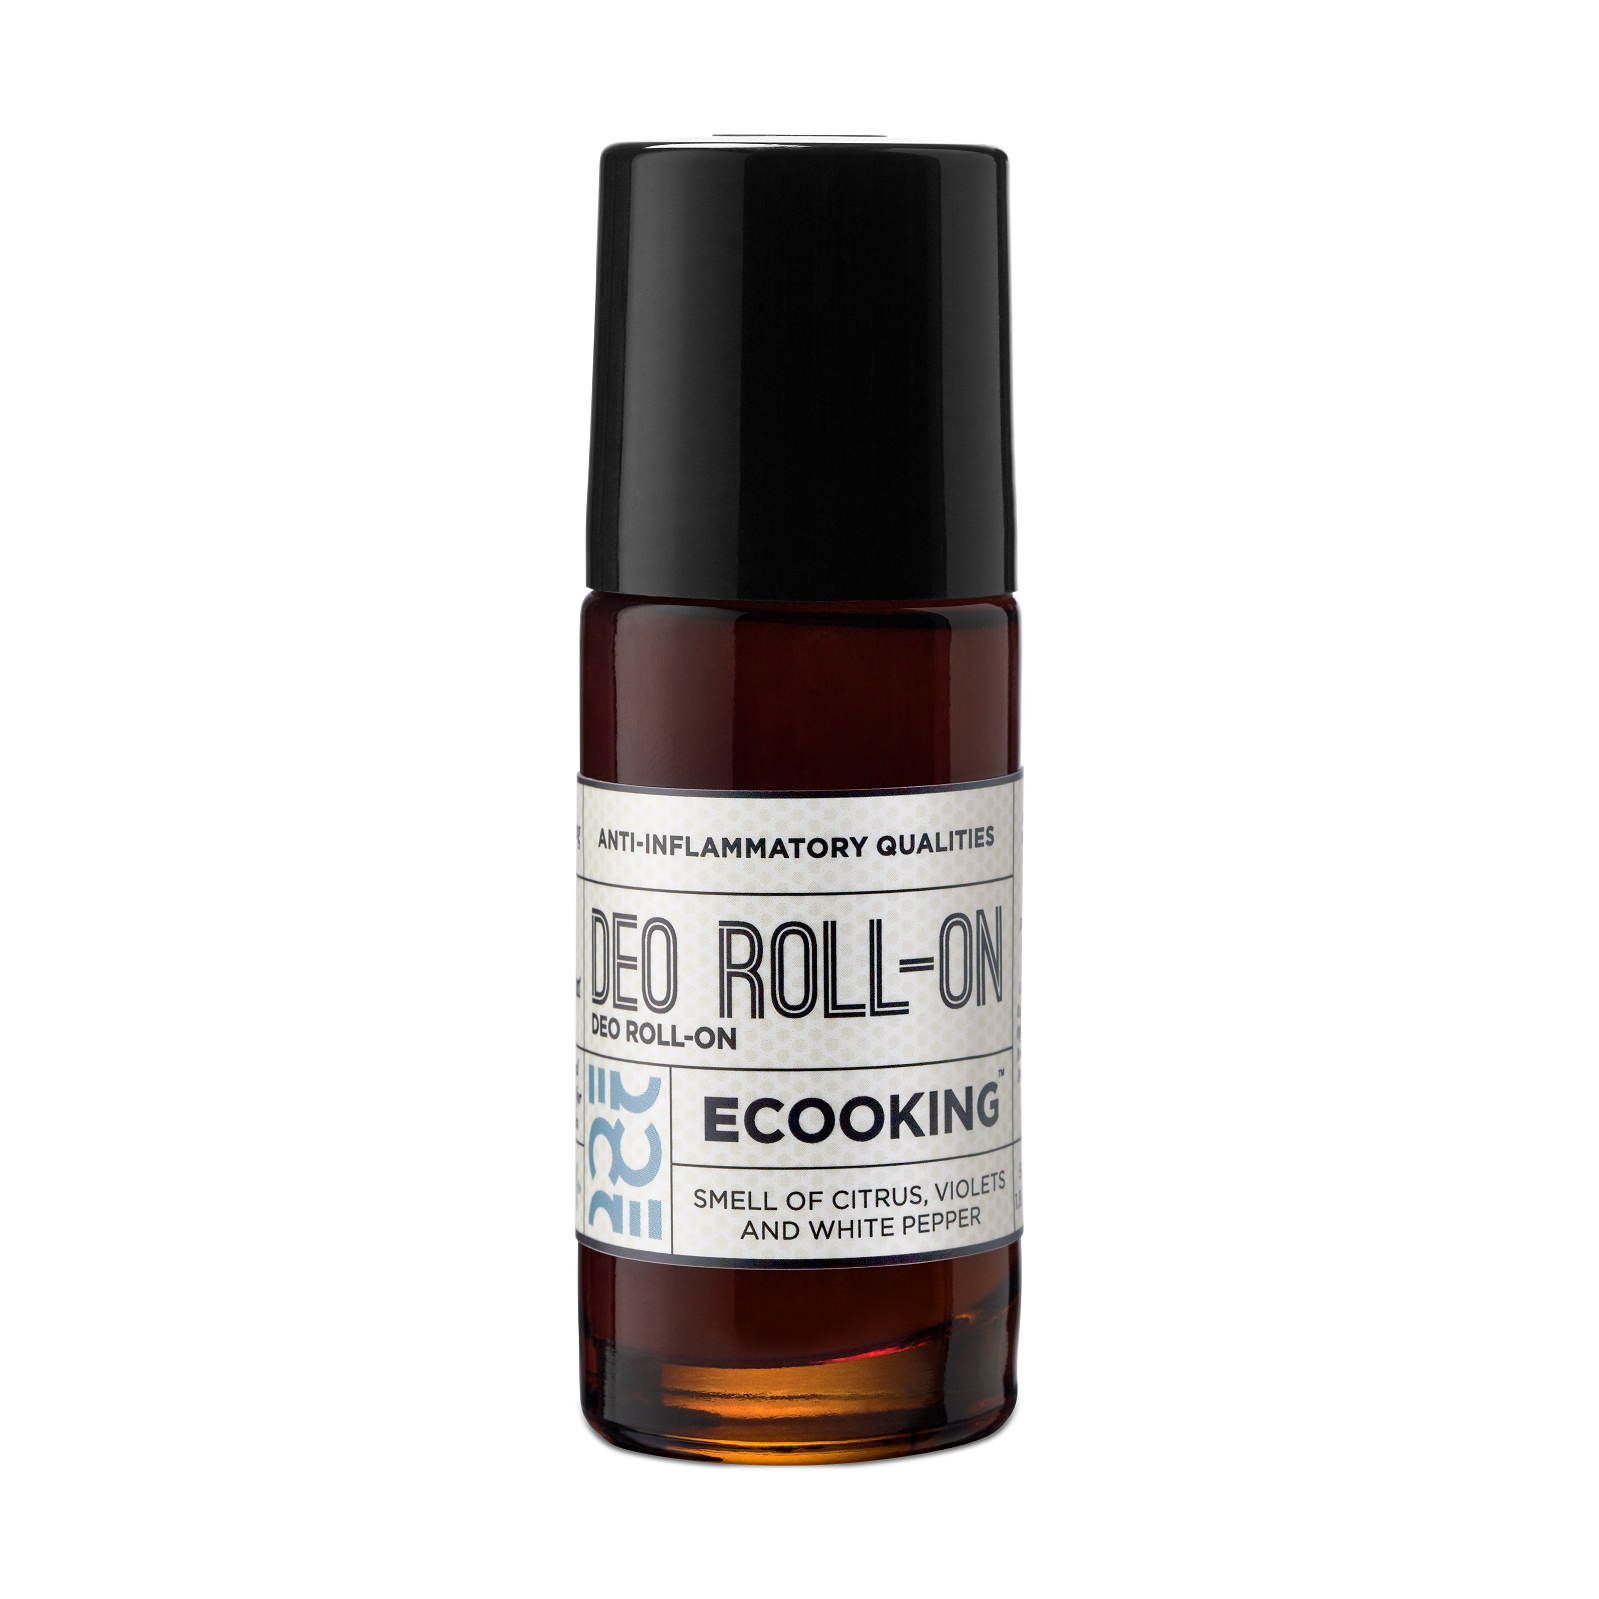 Ecooking - Deo Roll-on 50 ml